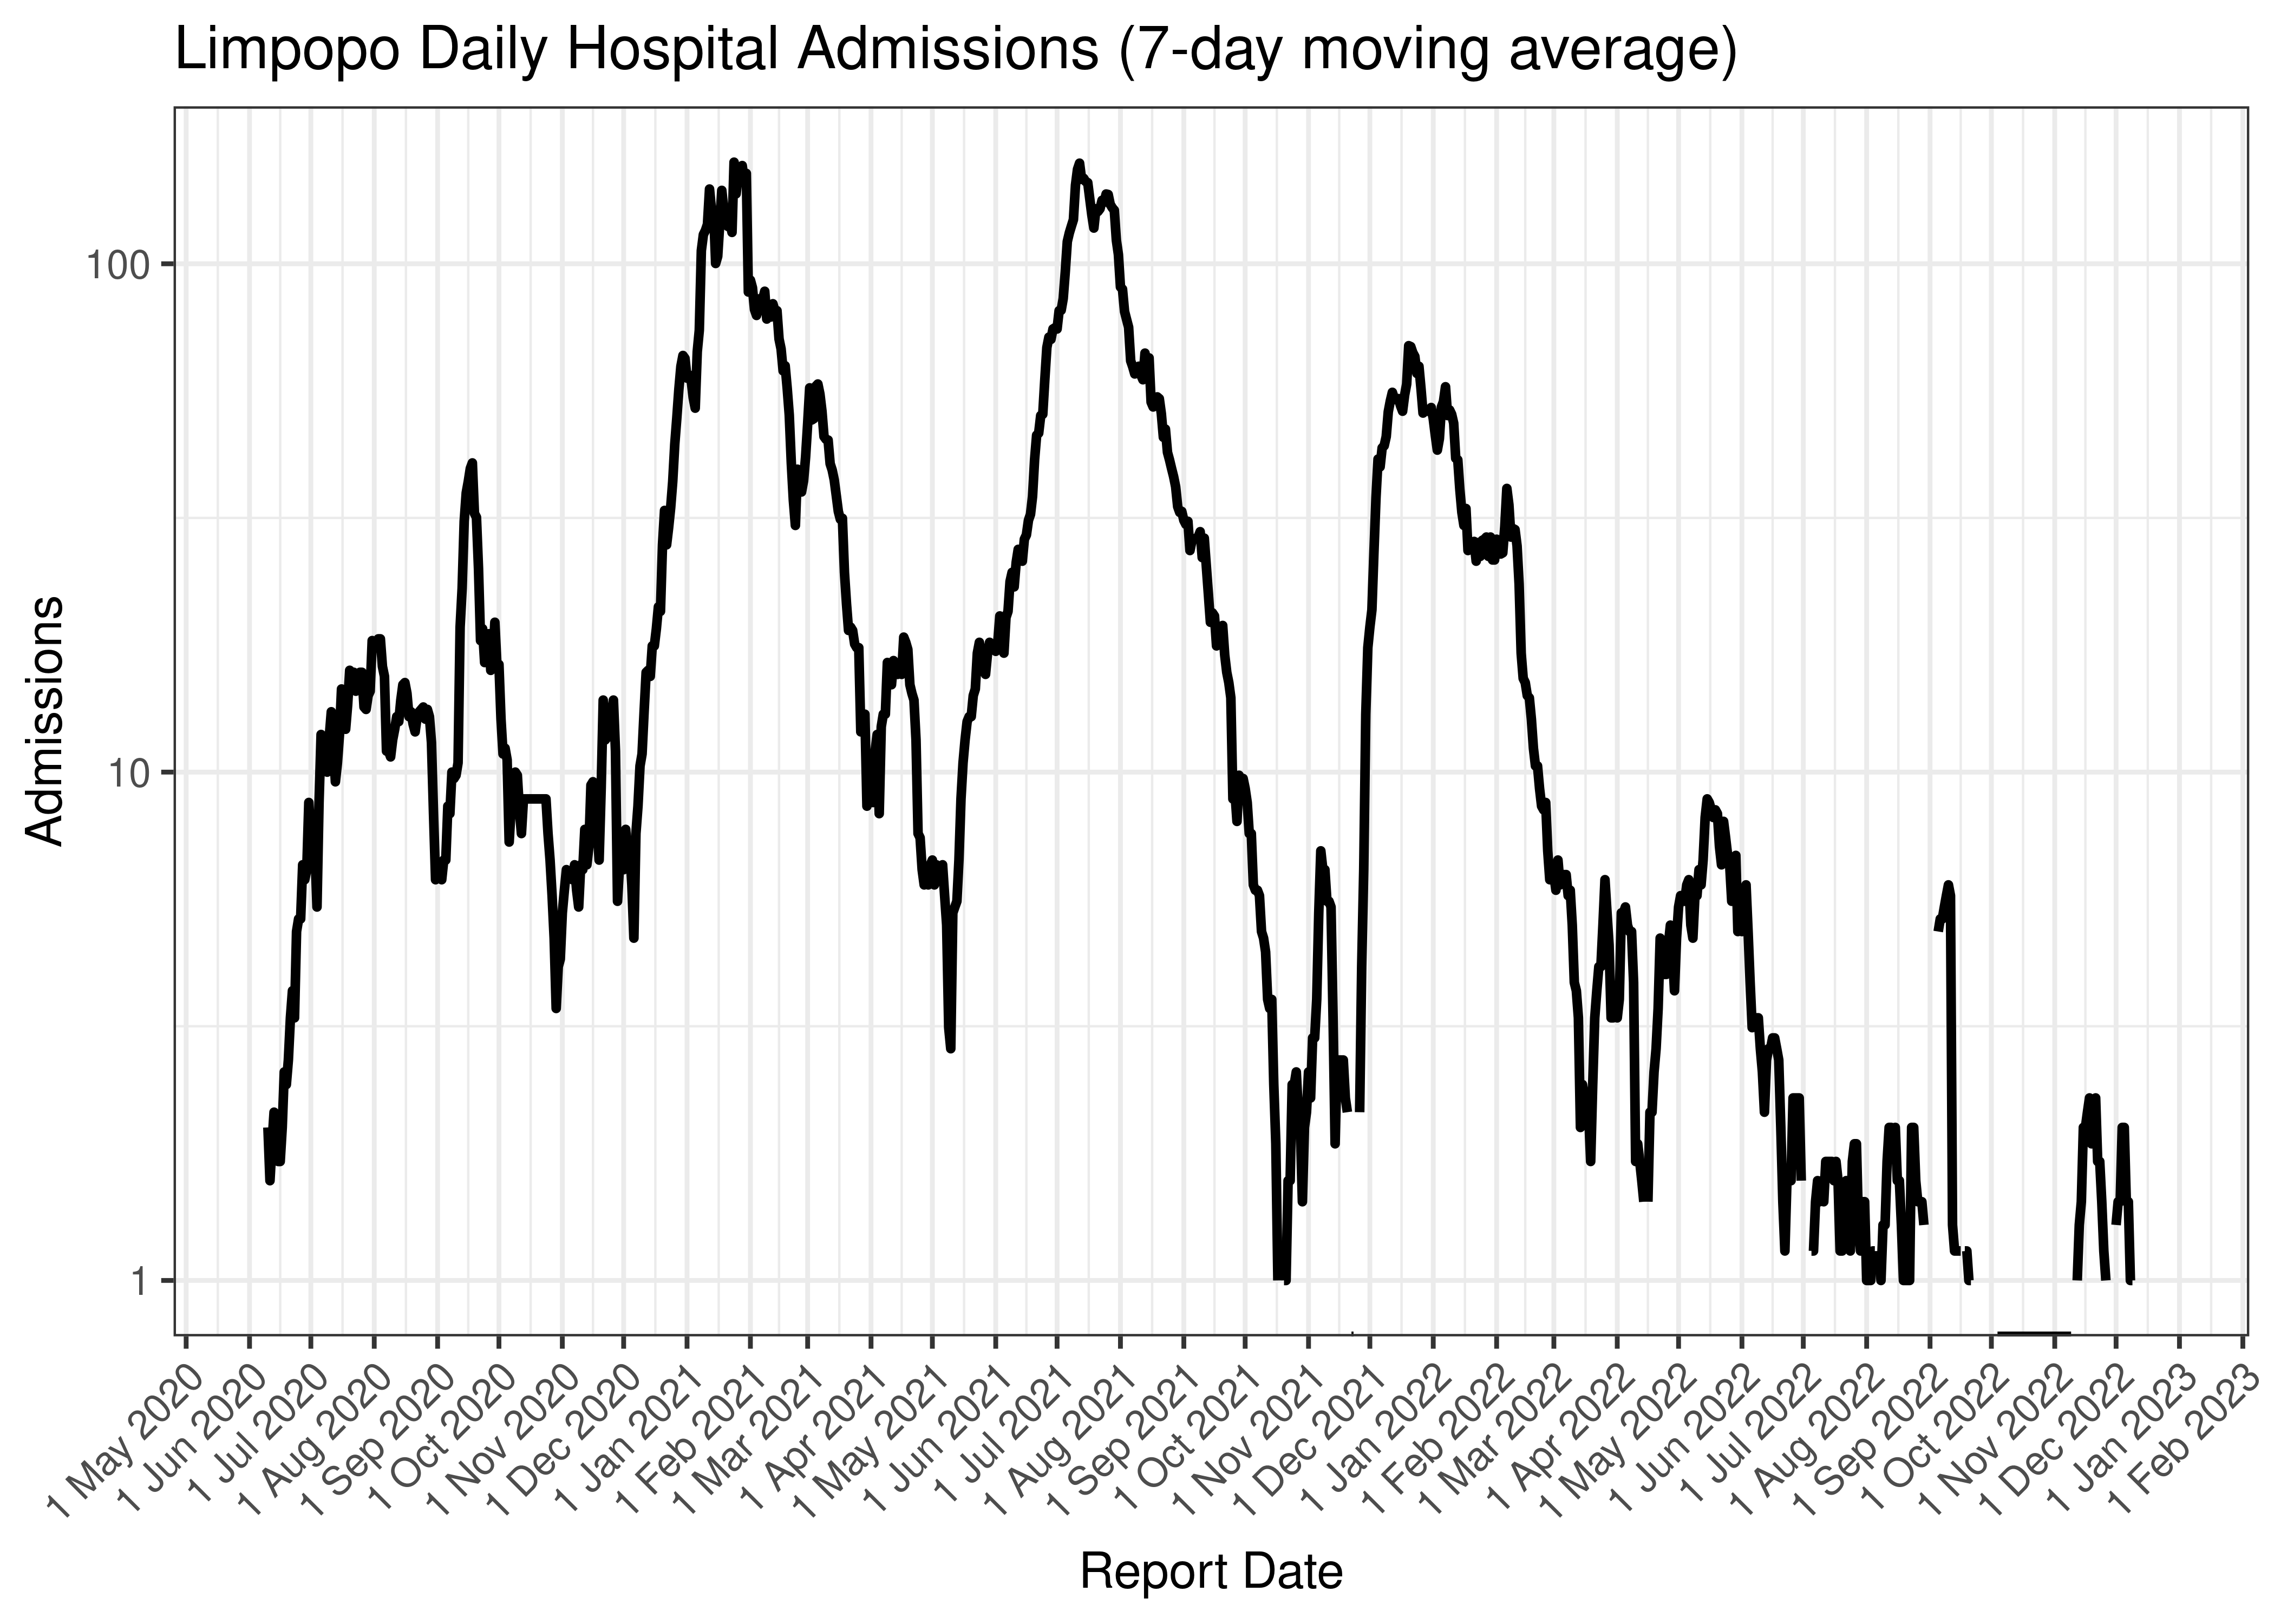 Limpopo Daily Hospital Admissions (7-day moving average)